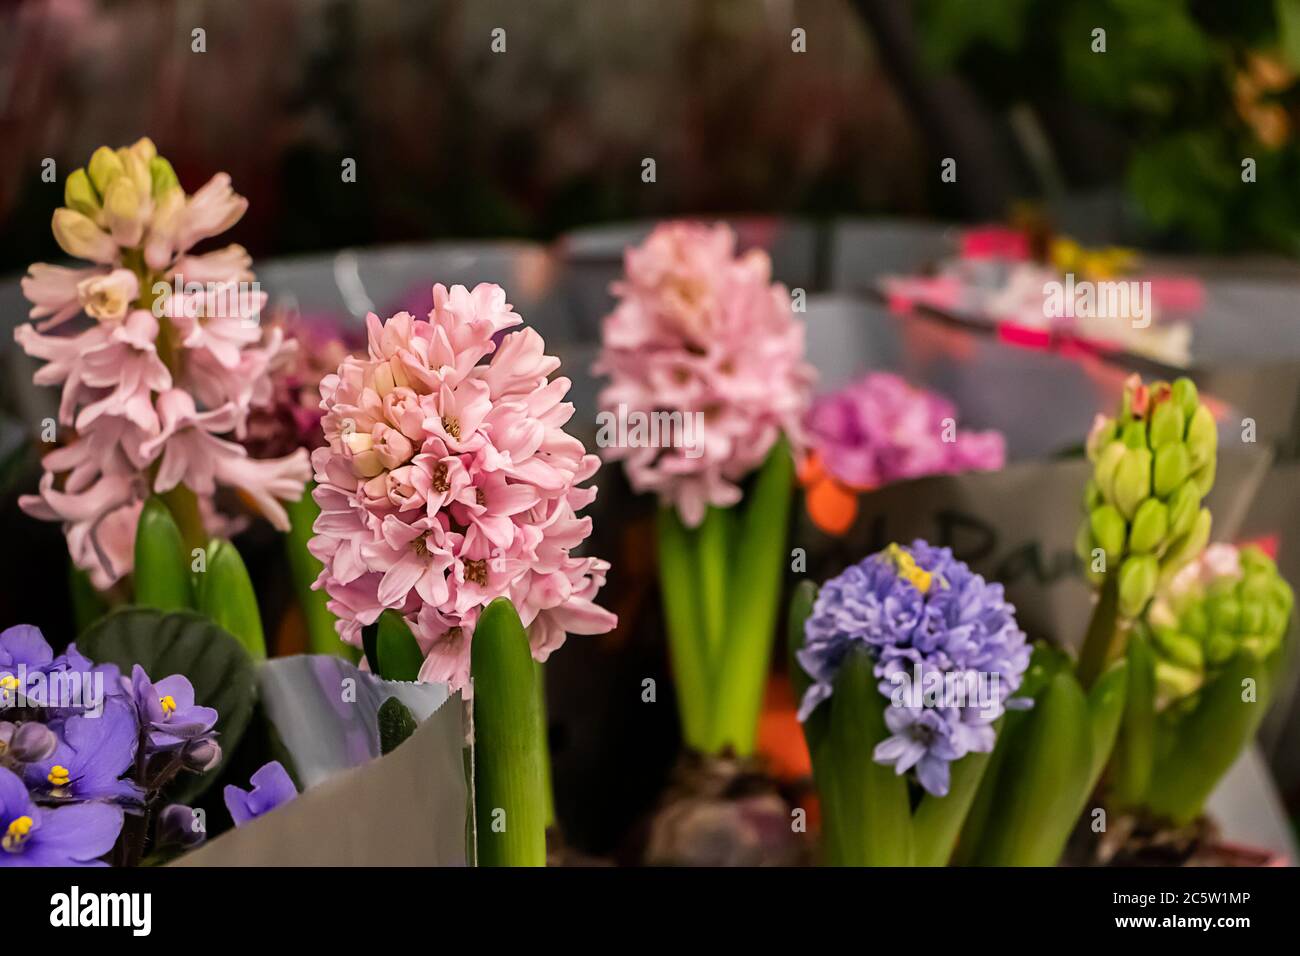 Beautiful blooming spring hyacinths in pots close-up. Stock Photo